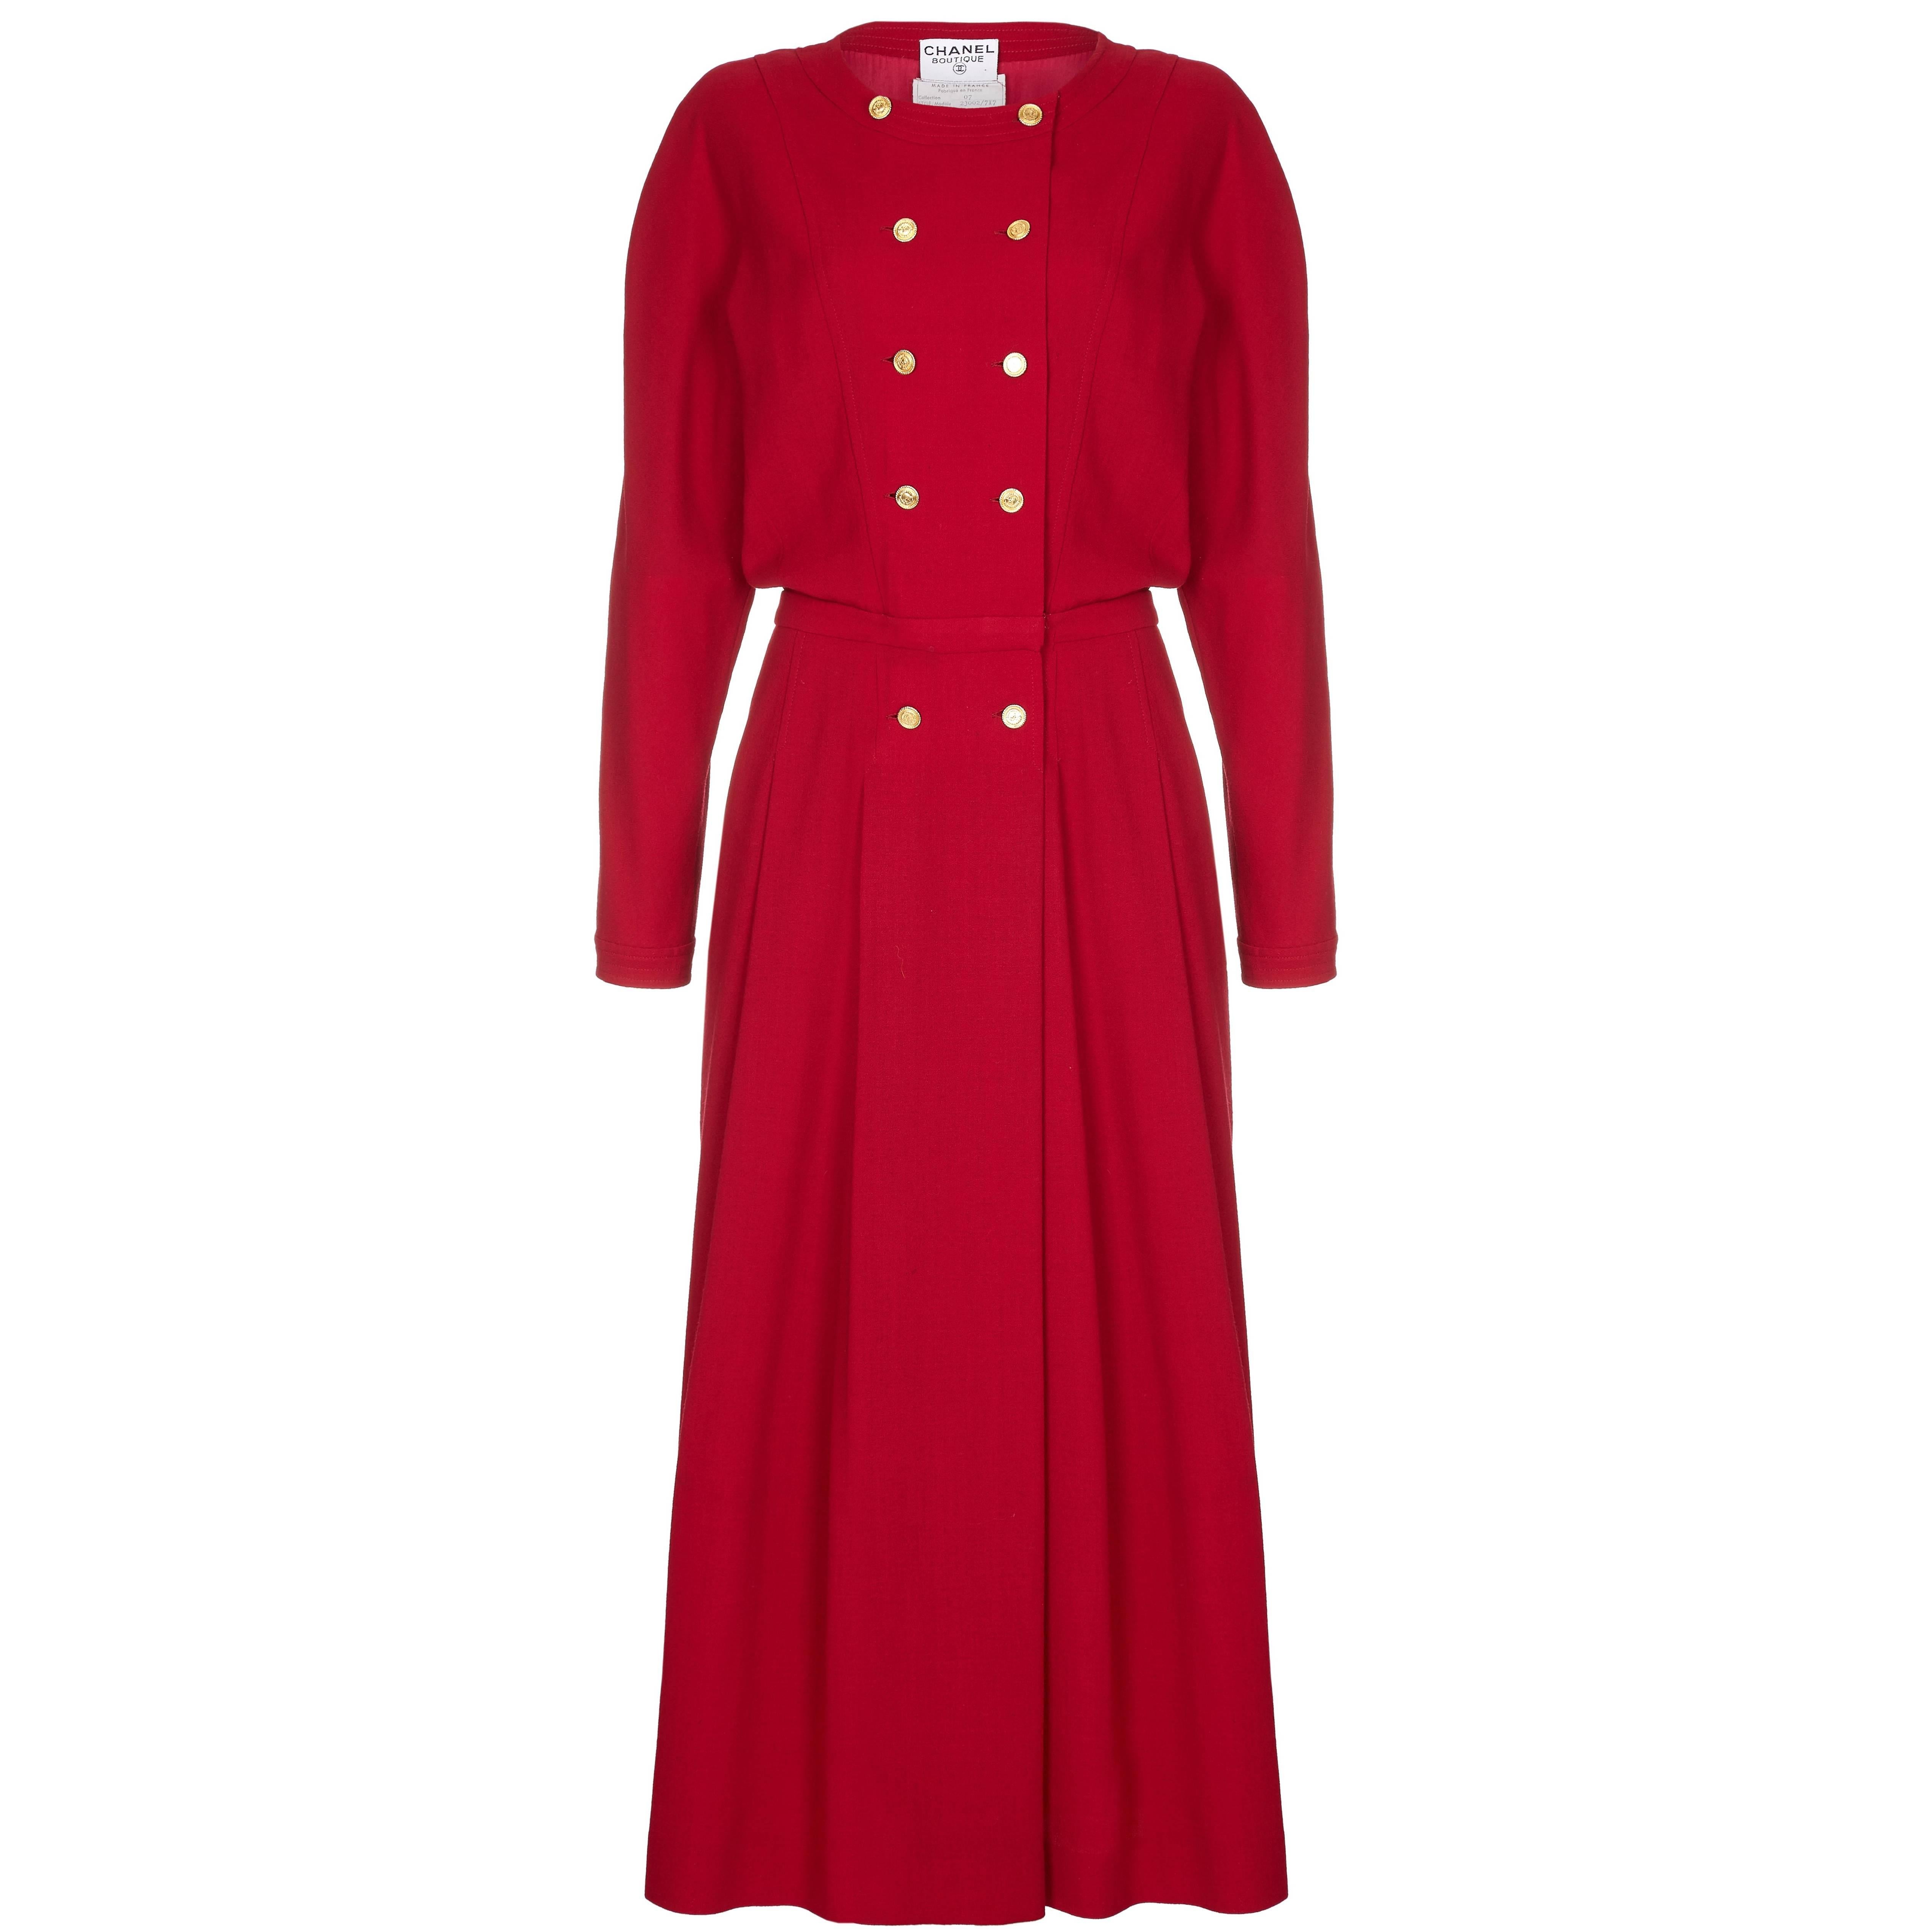 1980s Chanel Red Wool Dress